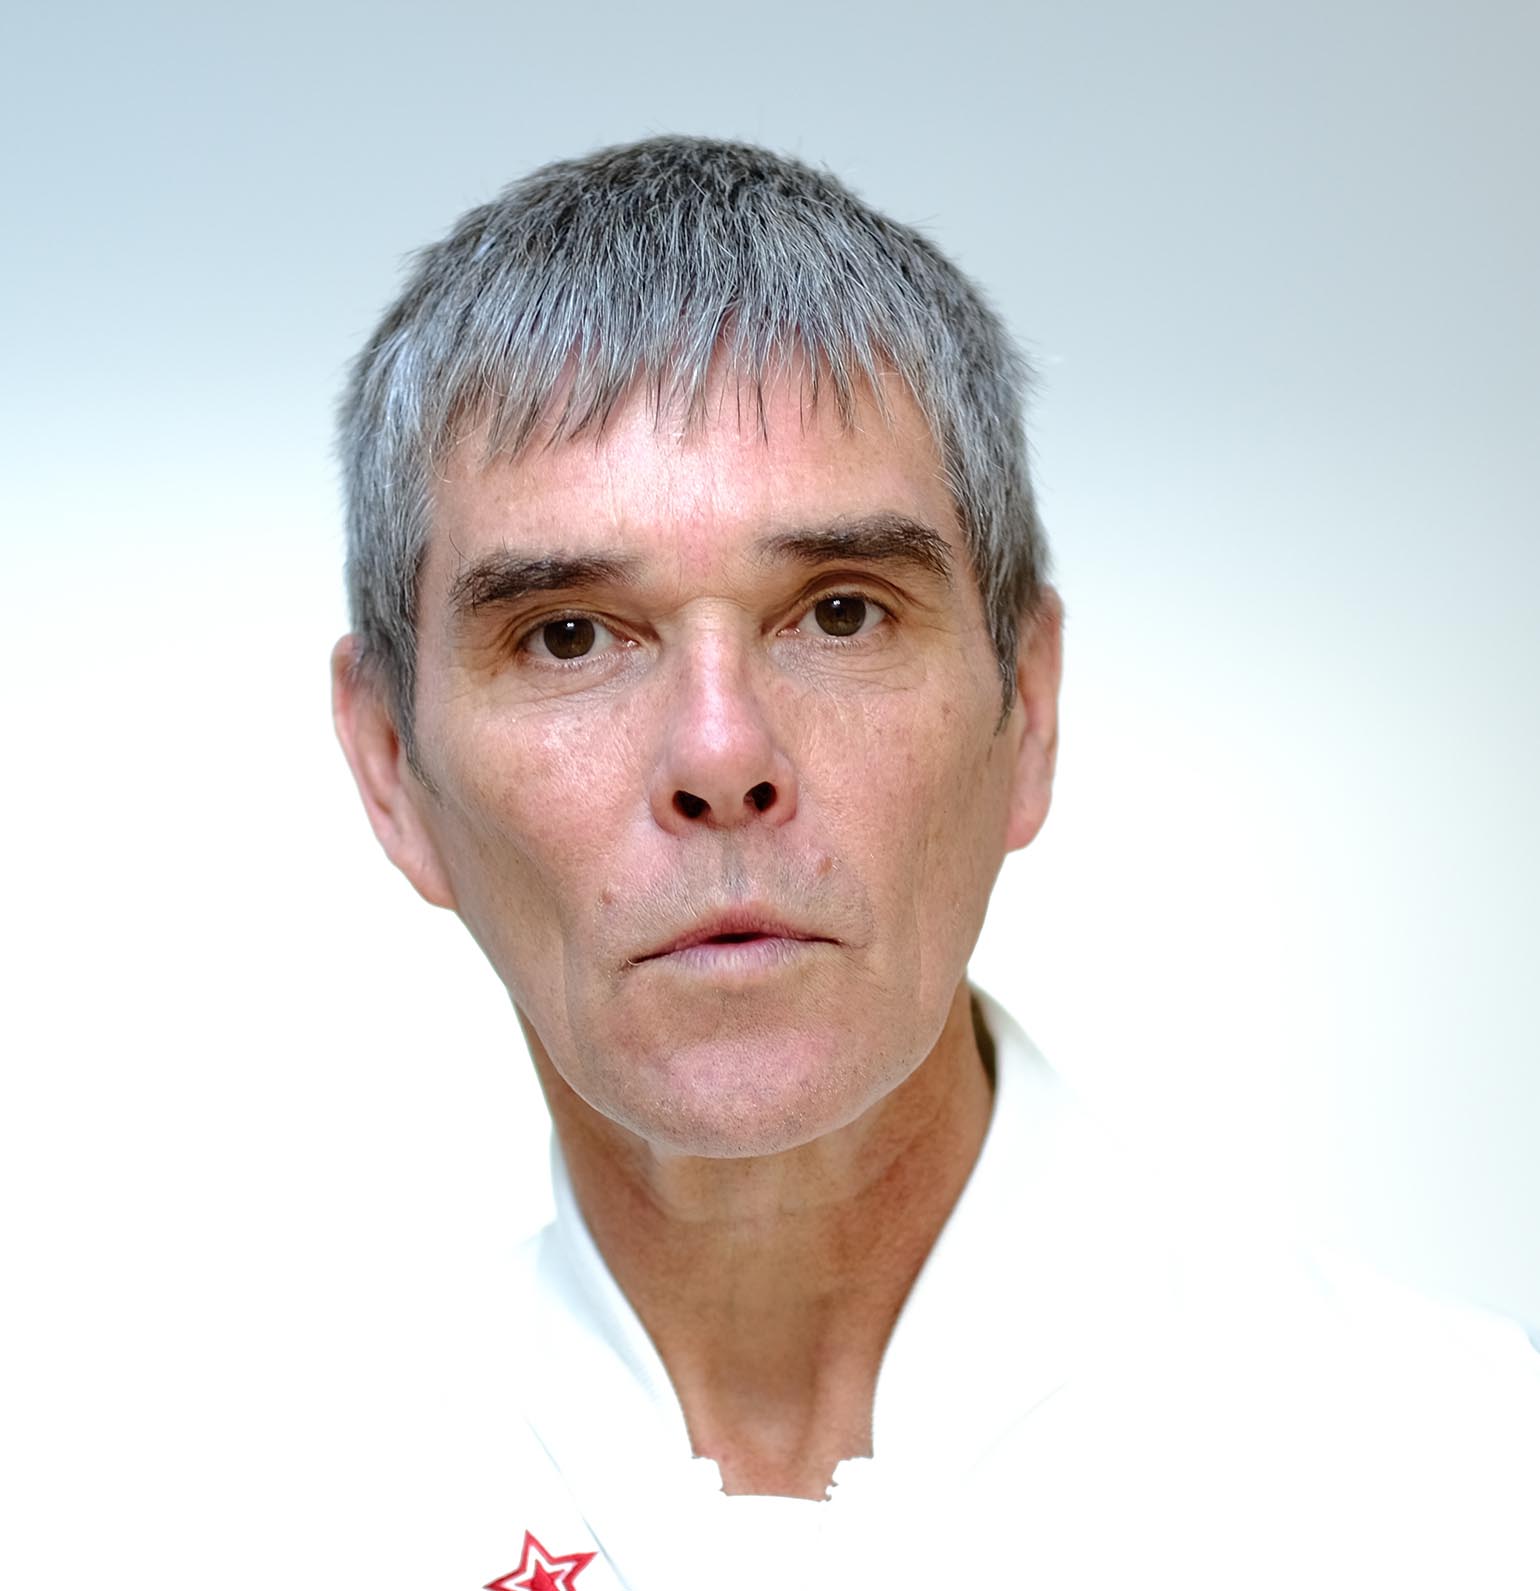 IAN BROWN announces a headline tour of Ireland in May 2020 1